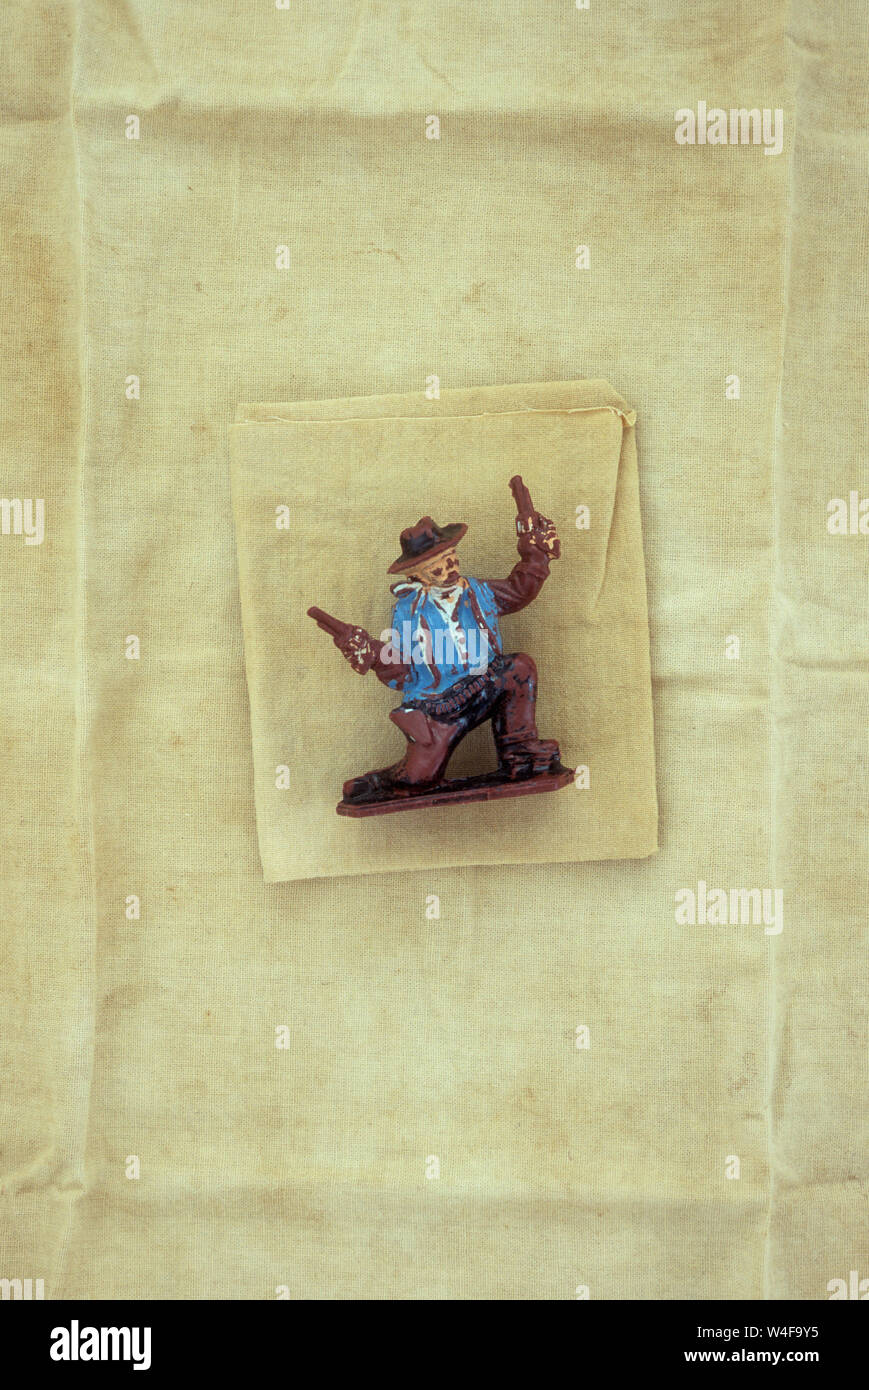 Plastic model of cowboy in blue jacket kneeling and waving or shooting guns with both hands lying on stained and folded linen Stock Photo